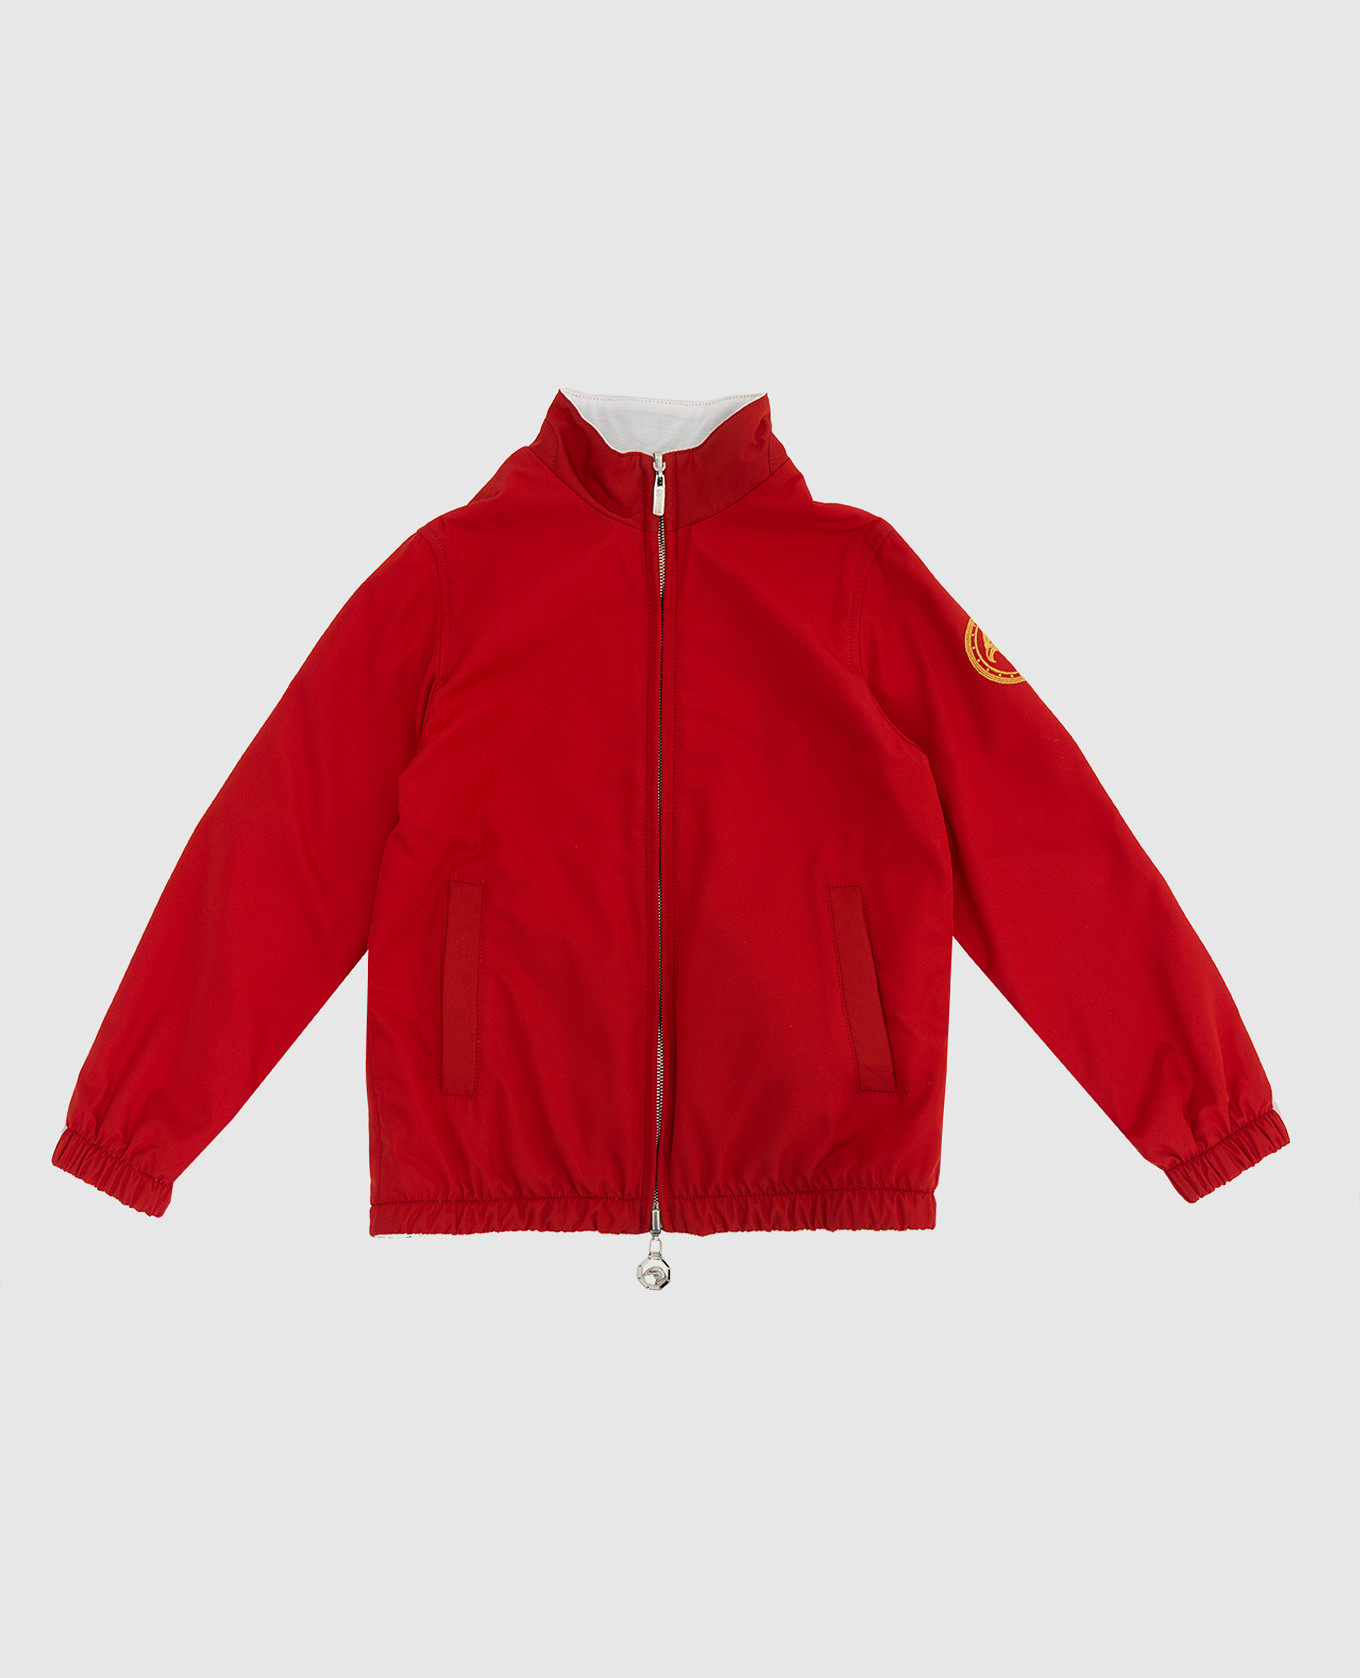 Children's red jacket with logo